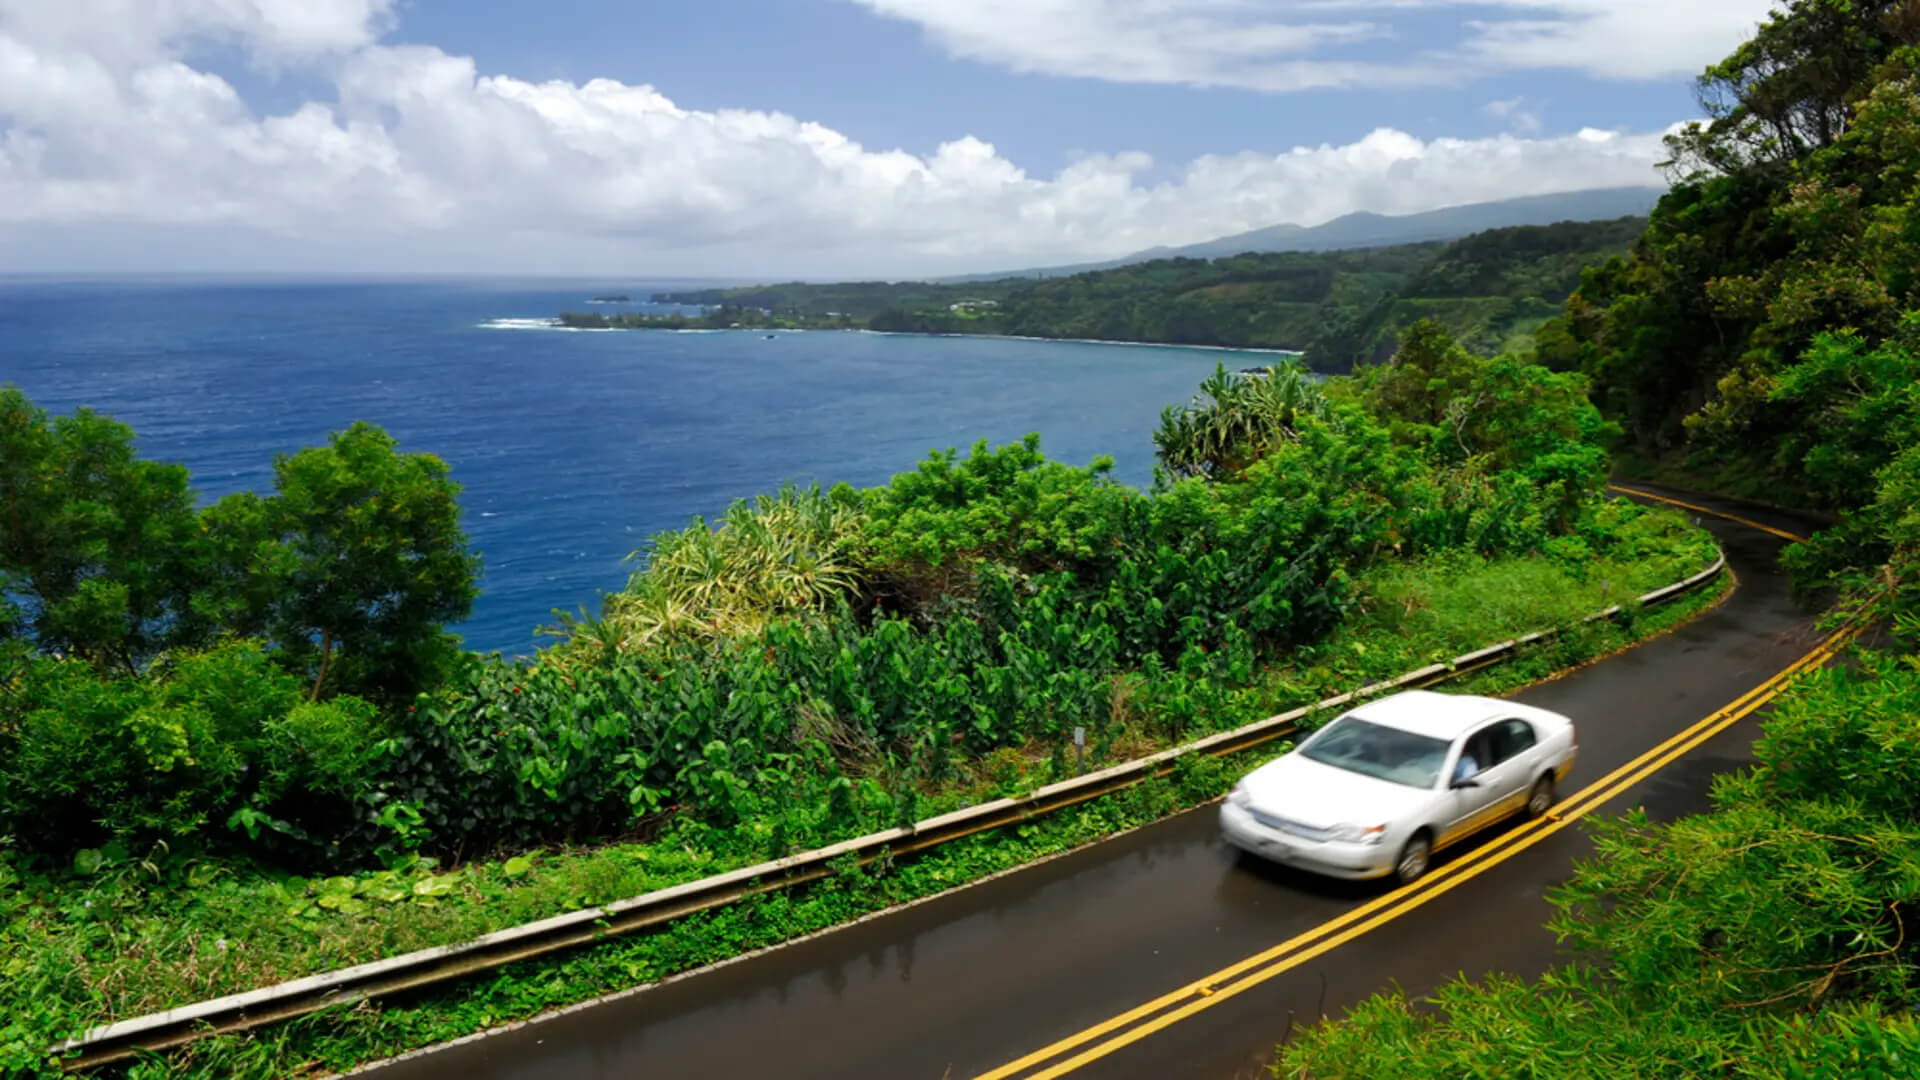 A rented car driving along a scenic road next to the ocean in Maui